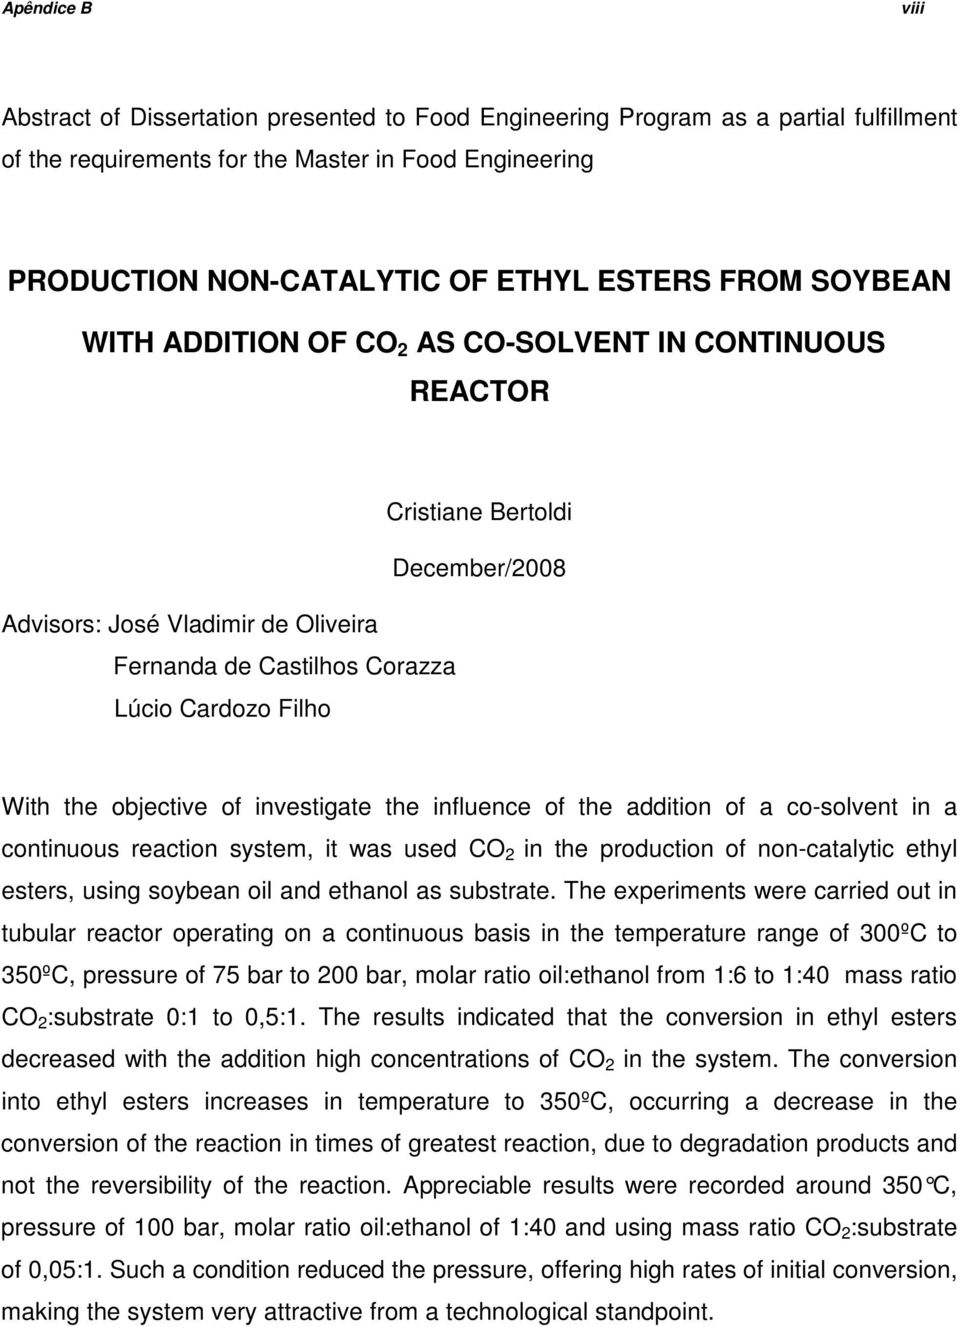 objective of investigate the influence of the addition of a co-solvent in a continuous reaction system, it was used CO 2 in the production of non-catalytic ethyl esters, using soybean oil and ethanol